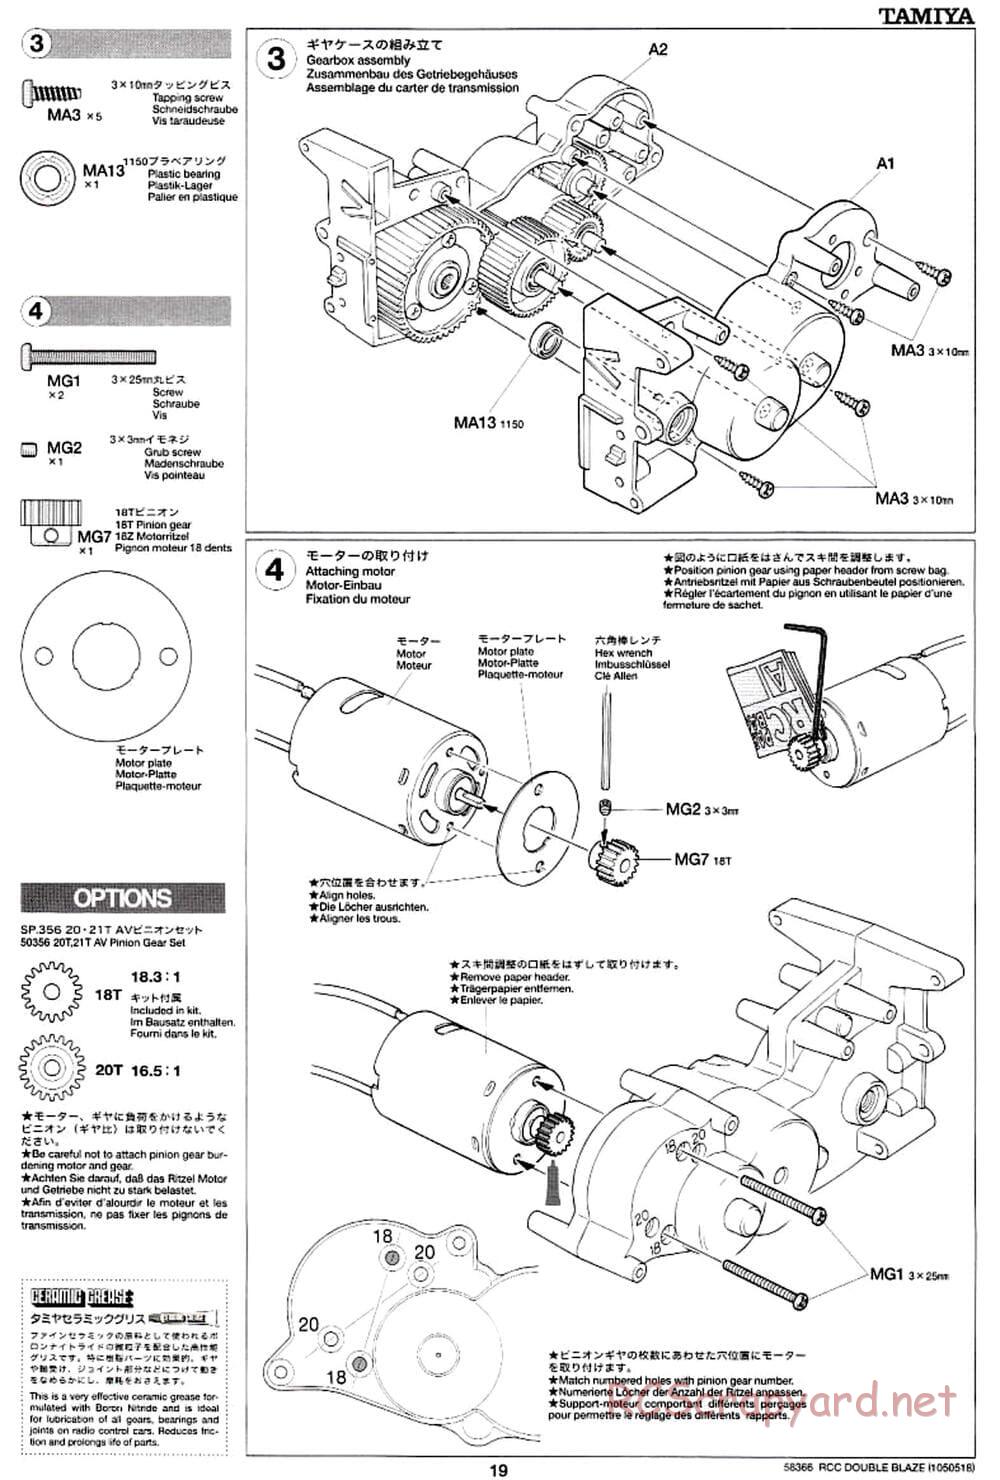 Tamiya - Double Blaze - WR-01 Chassis - Manual - Page 19